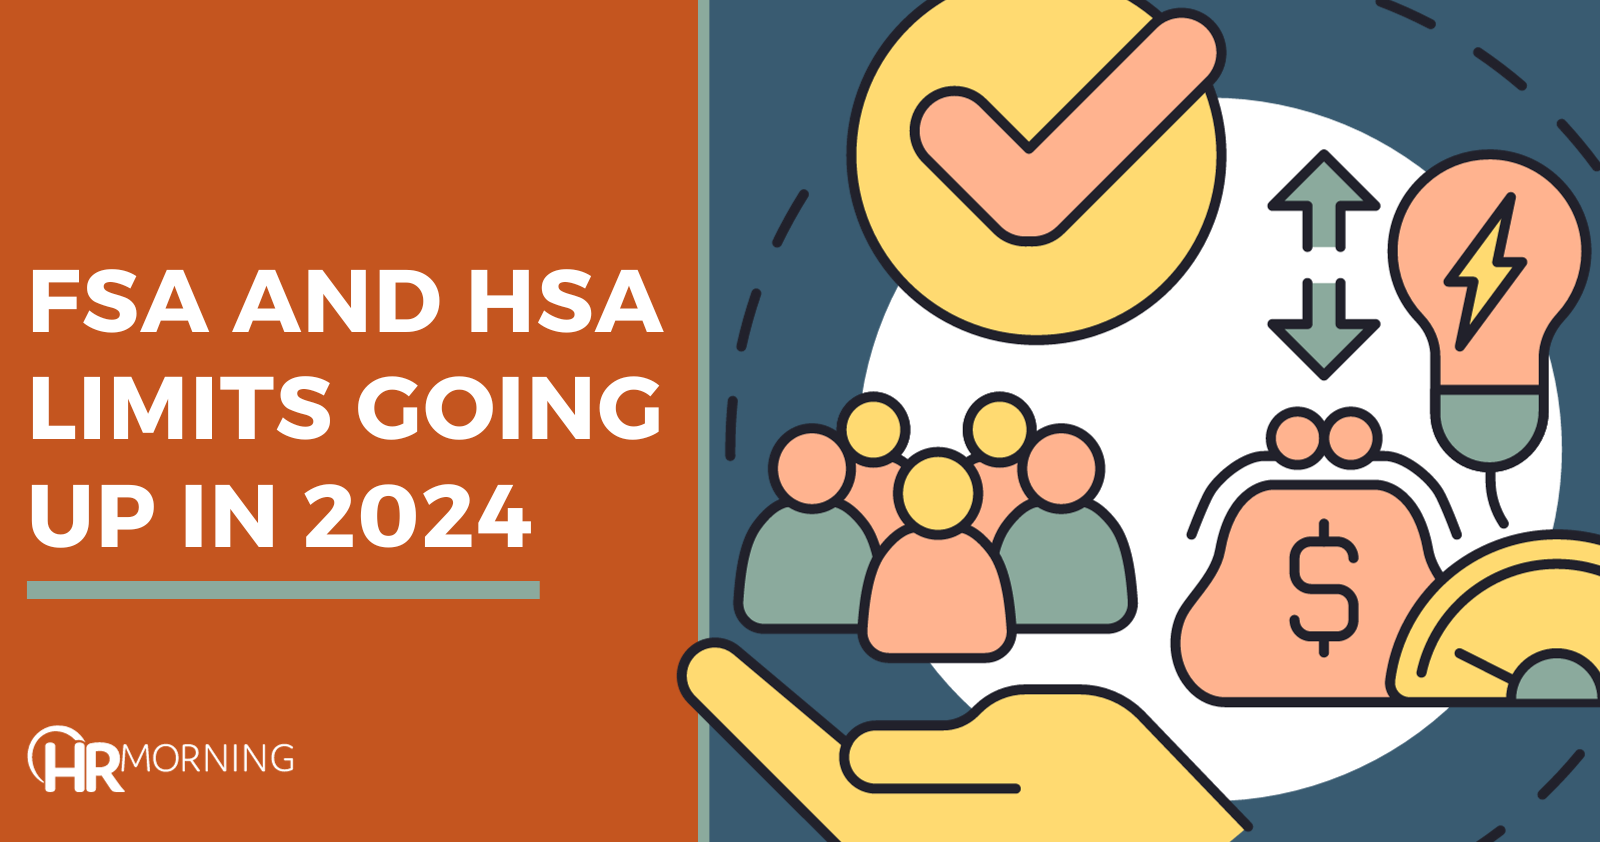 FSA and HSA limits going up in 2024